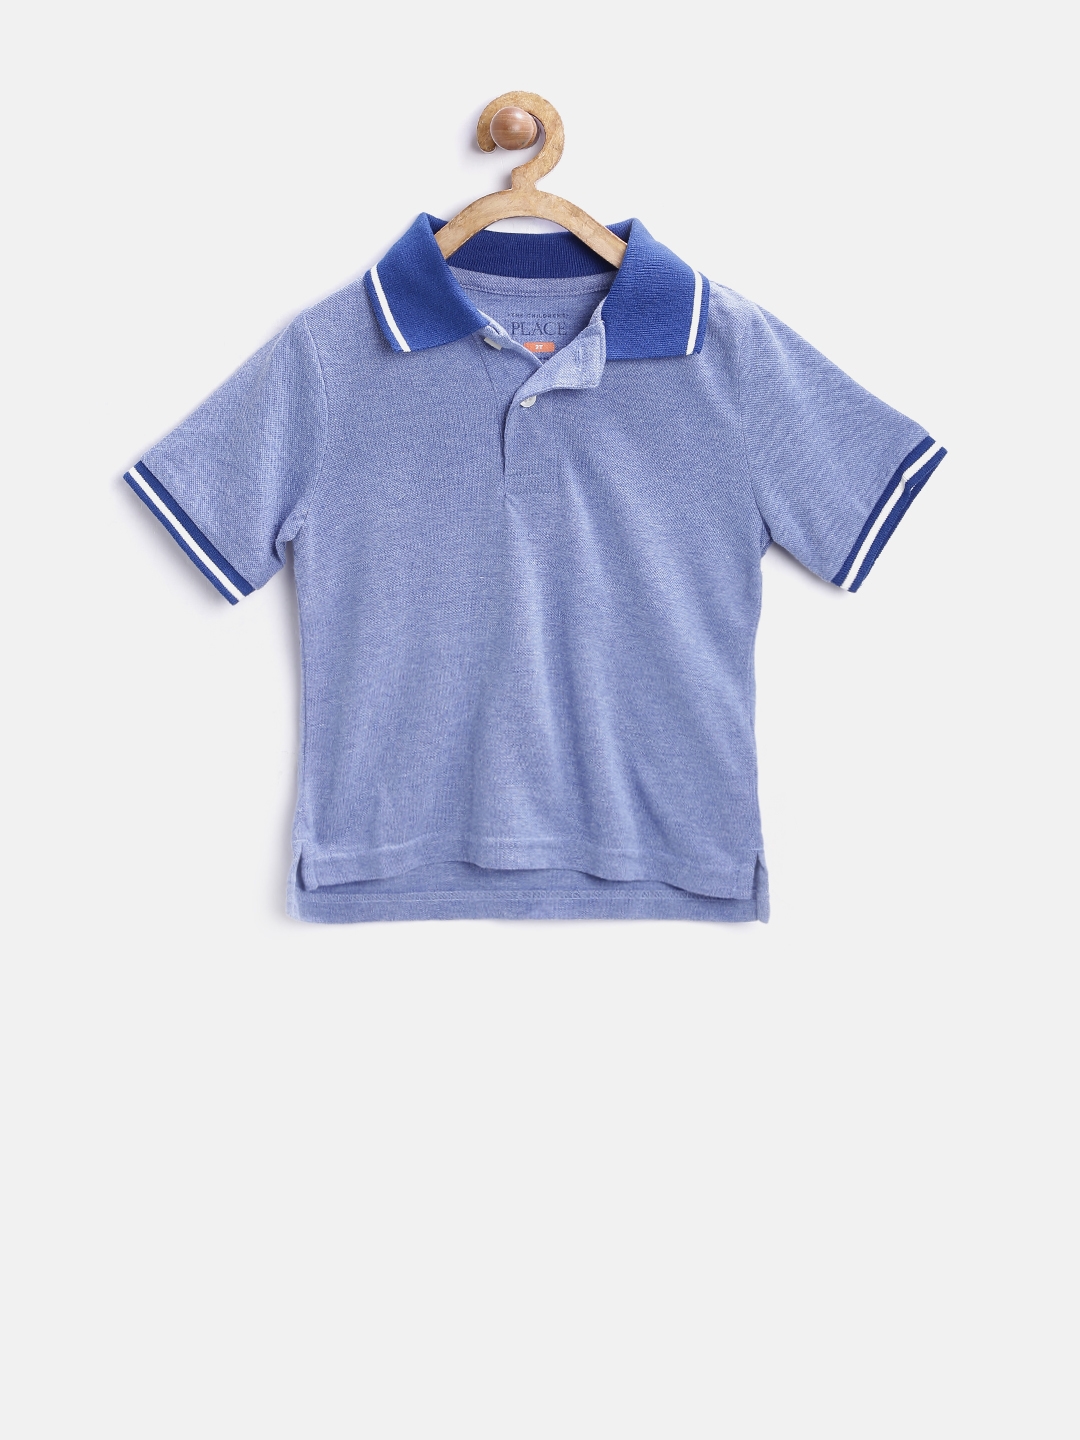 The Childrens Place Boys Short Sleeve Solid Polo